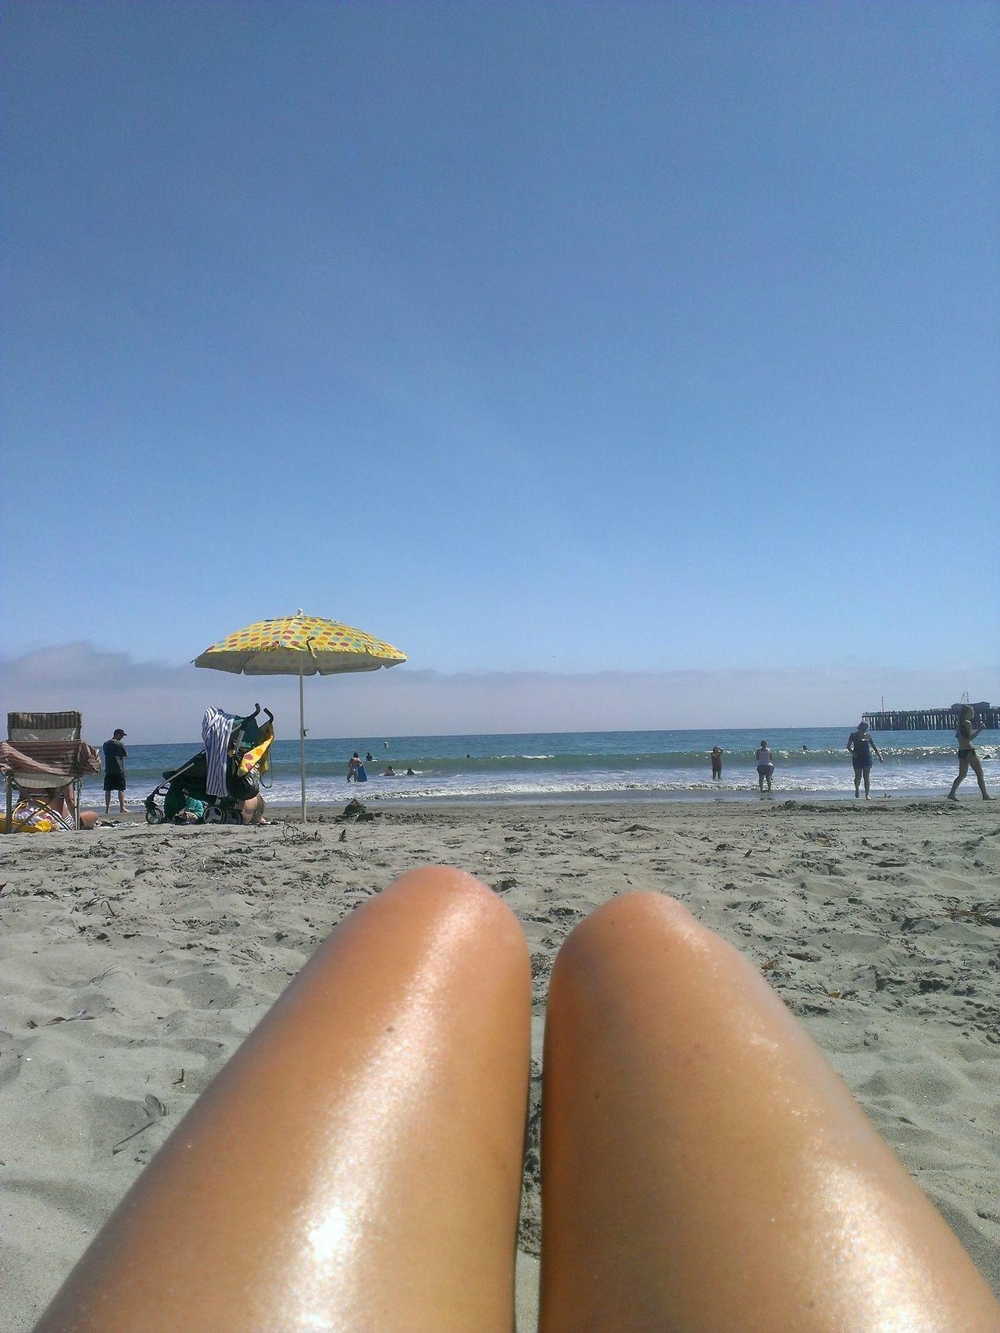 Legs That Look Like Hot Dogs 